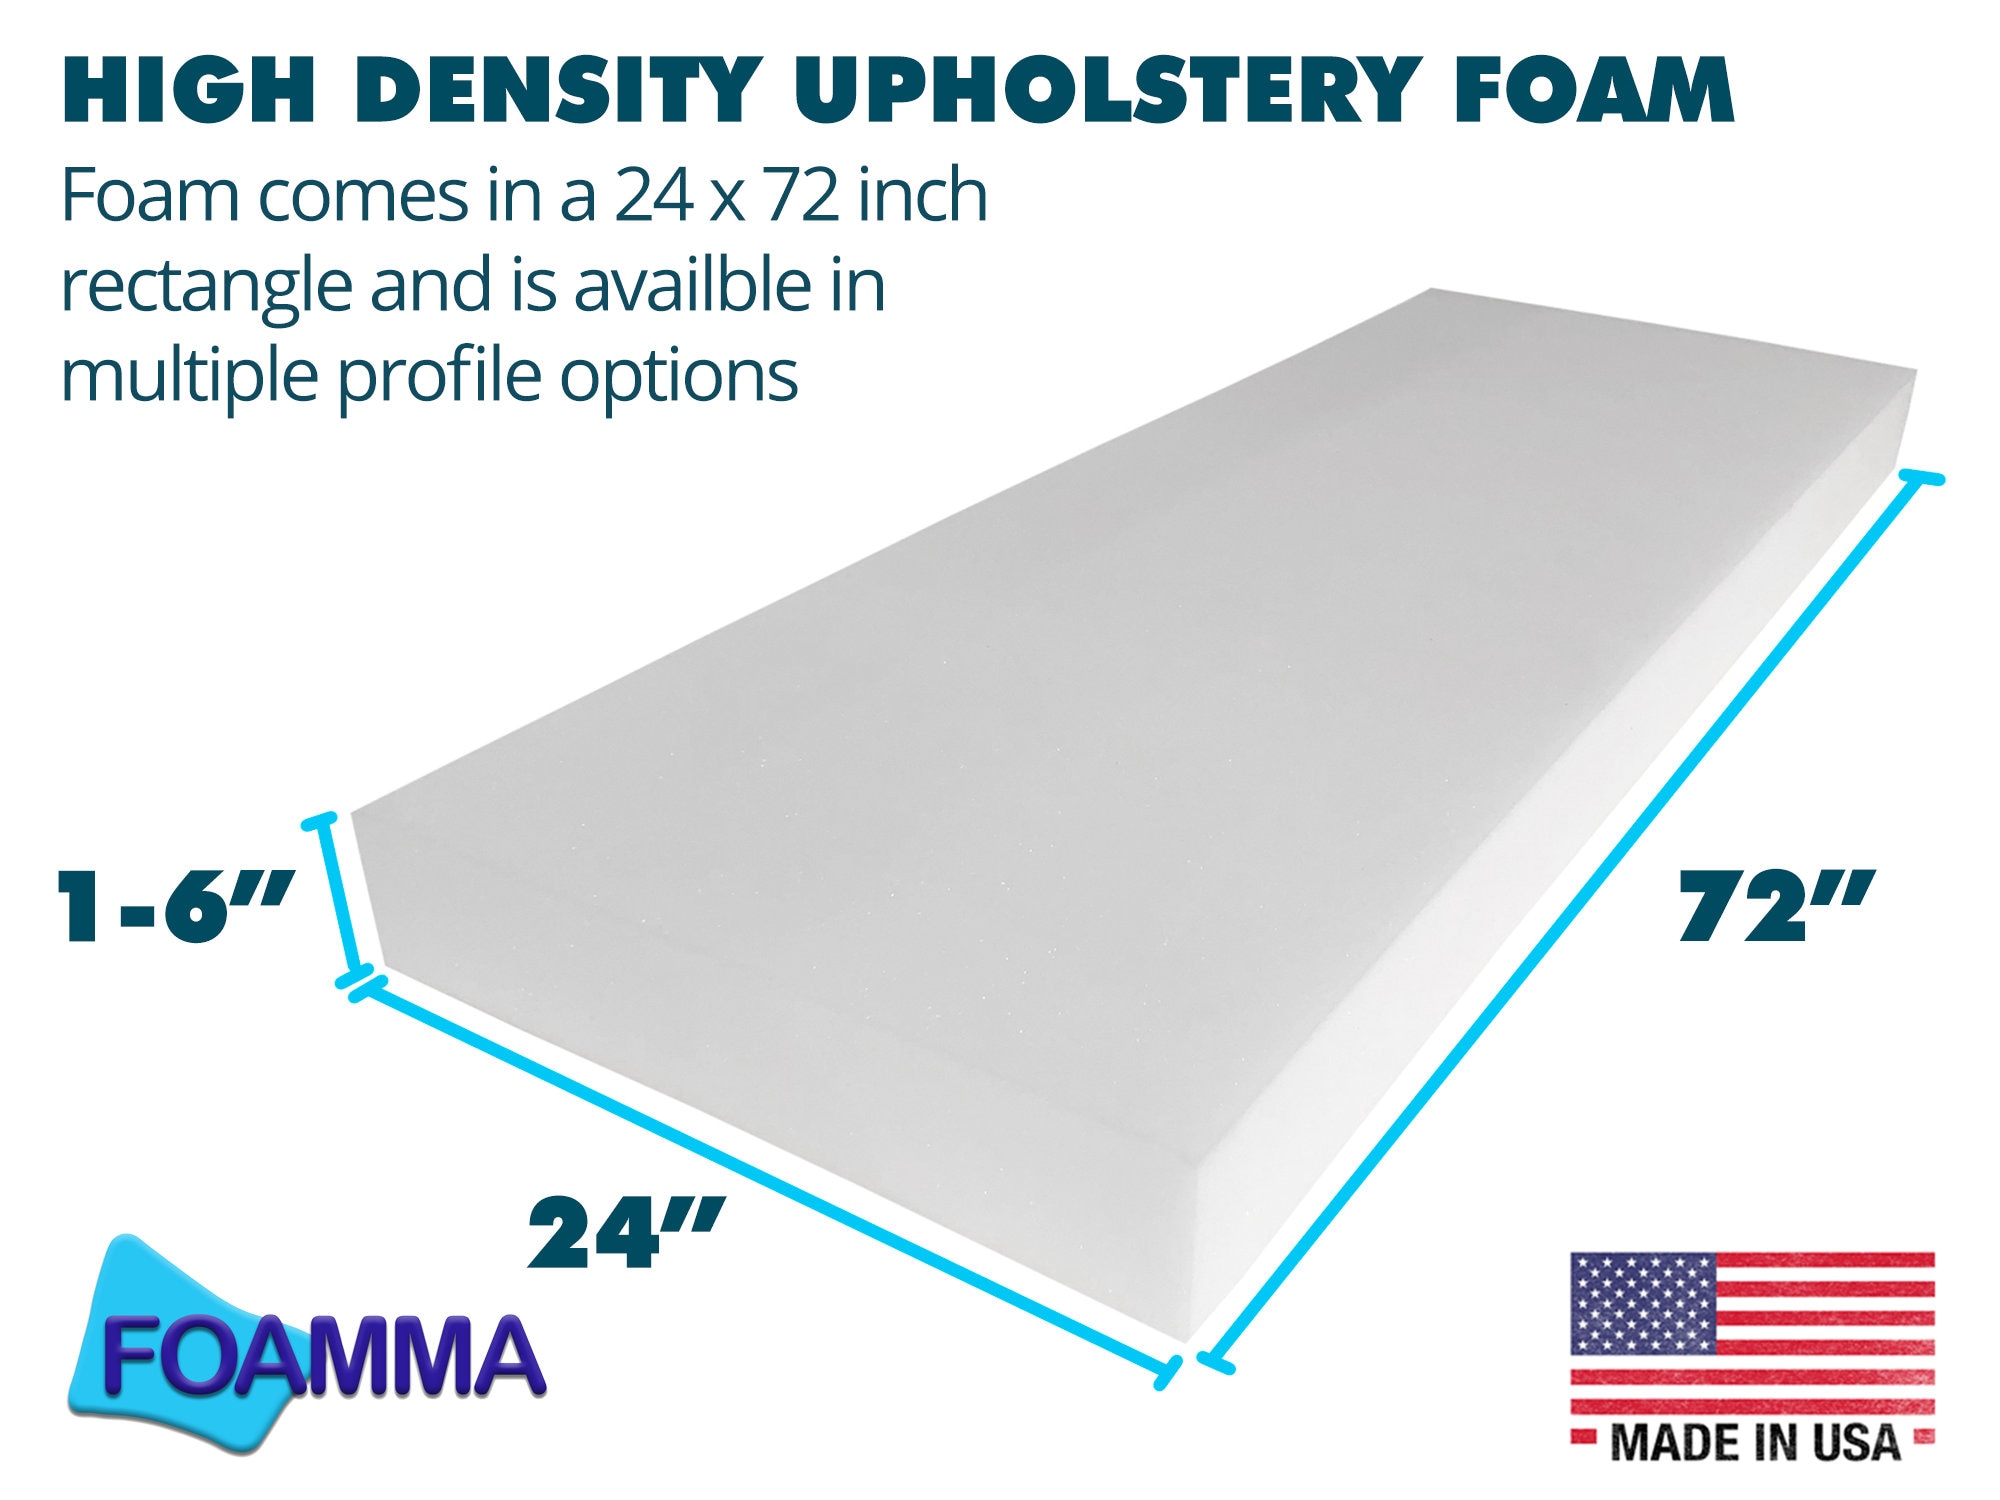 Foamma 6 x 24 x 24 High Density Upholstery Foam Padding, Thick-Custom Pillow, Chair, and Couch Cushion Replacement Foam, Craft Foam Upholstery